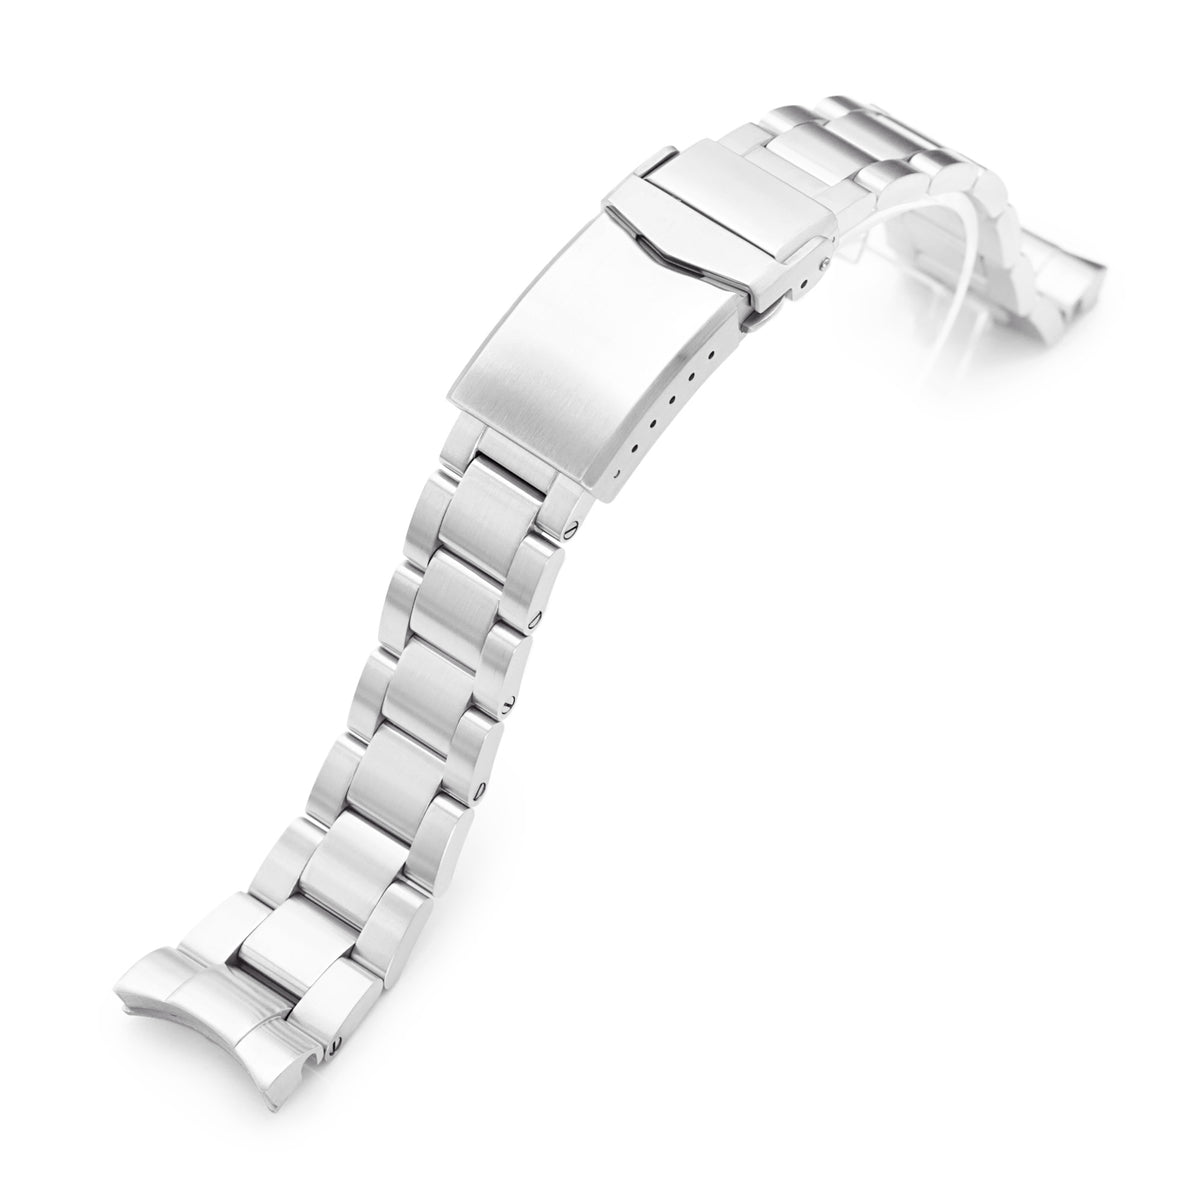 20mm Super Boyer Watch Band for RX SUB 5512, 316L Stainless Steel Brushed V-Clasp Strapcode Watch Bands